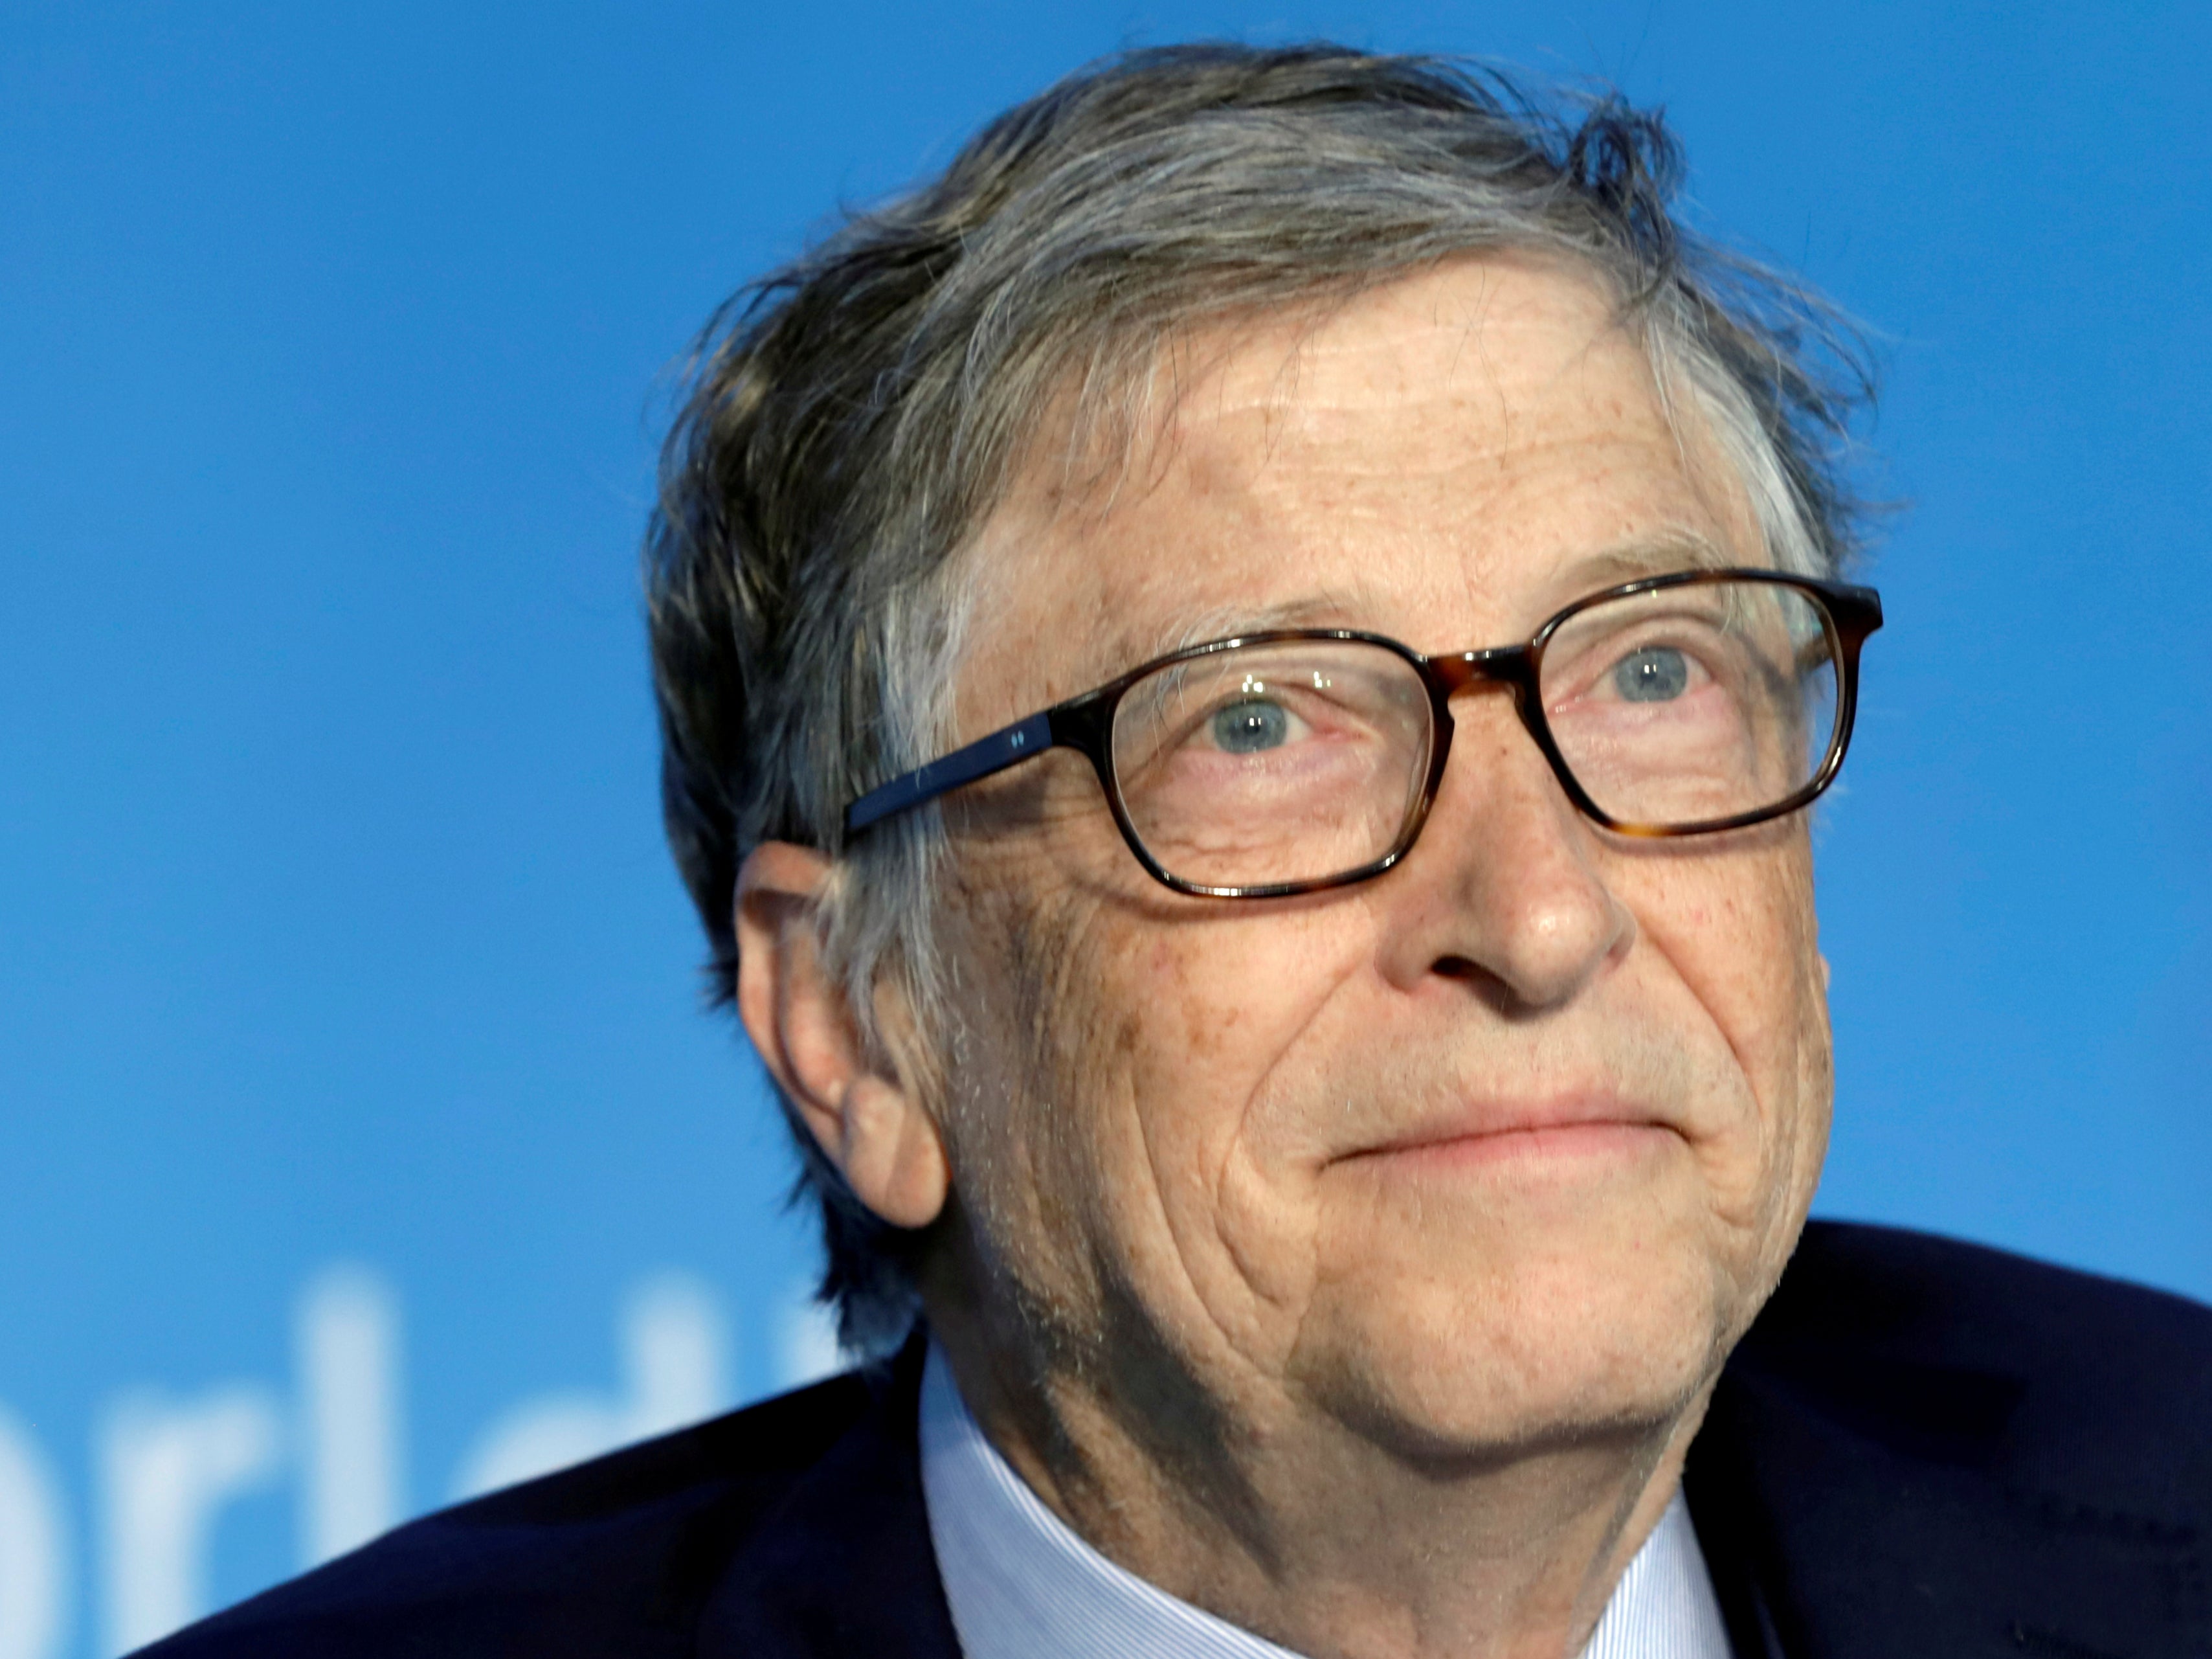 <p>Bill Gates says in interview that he expected the US would do a better job of handling such a crisis</p>